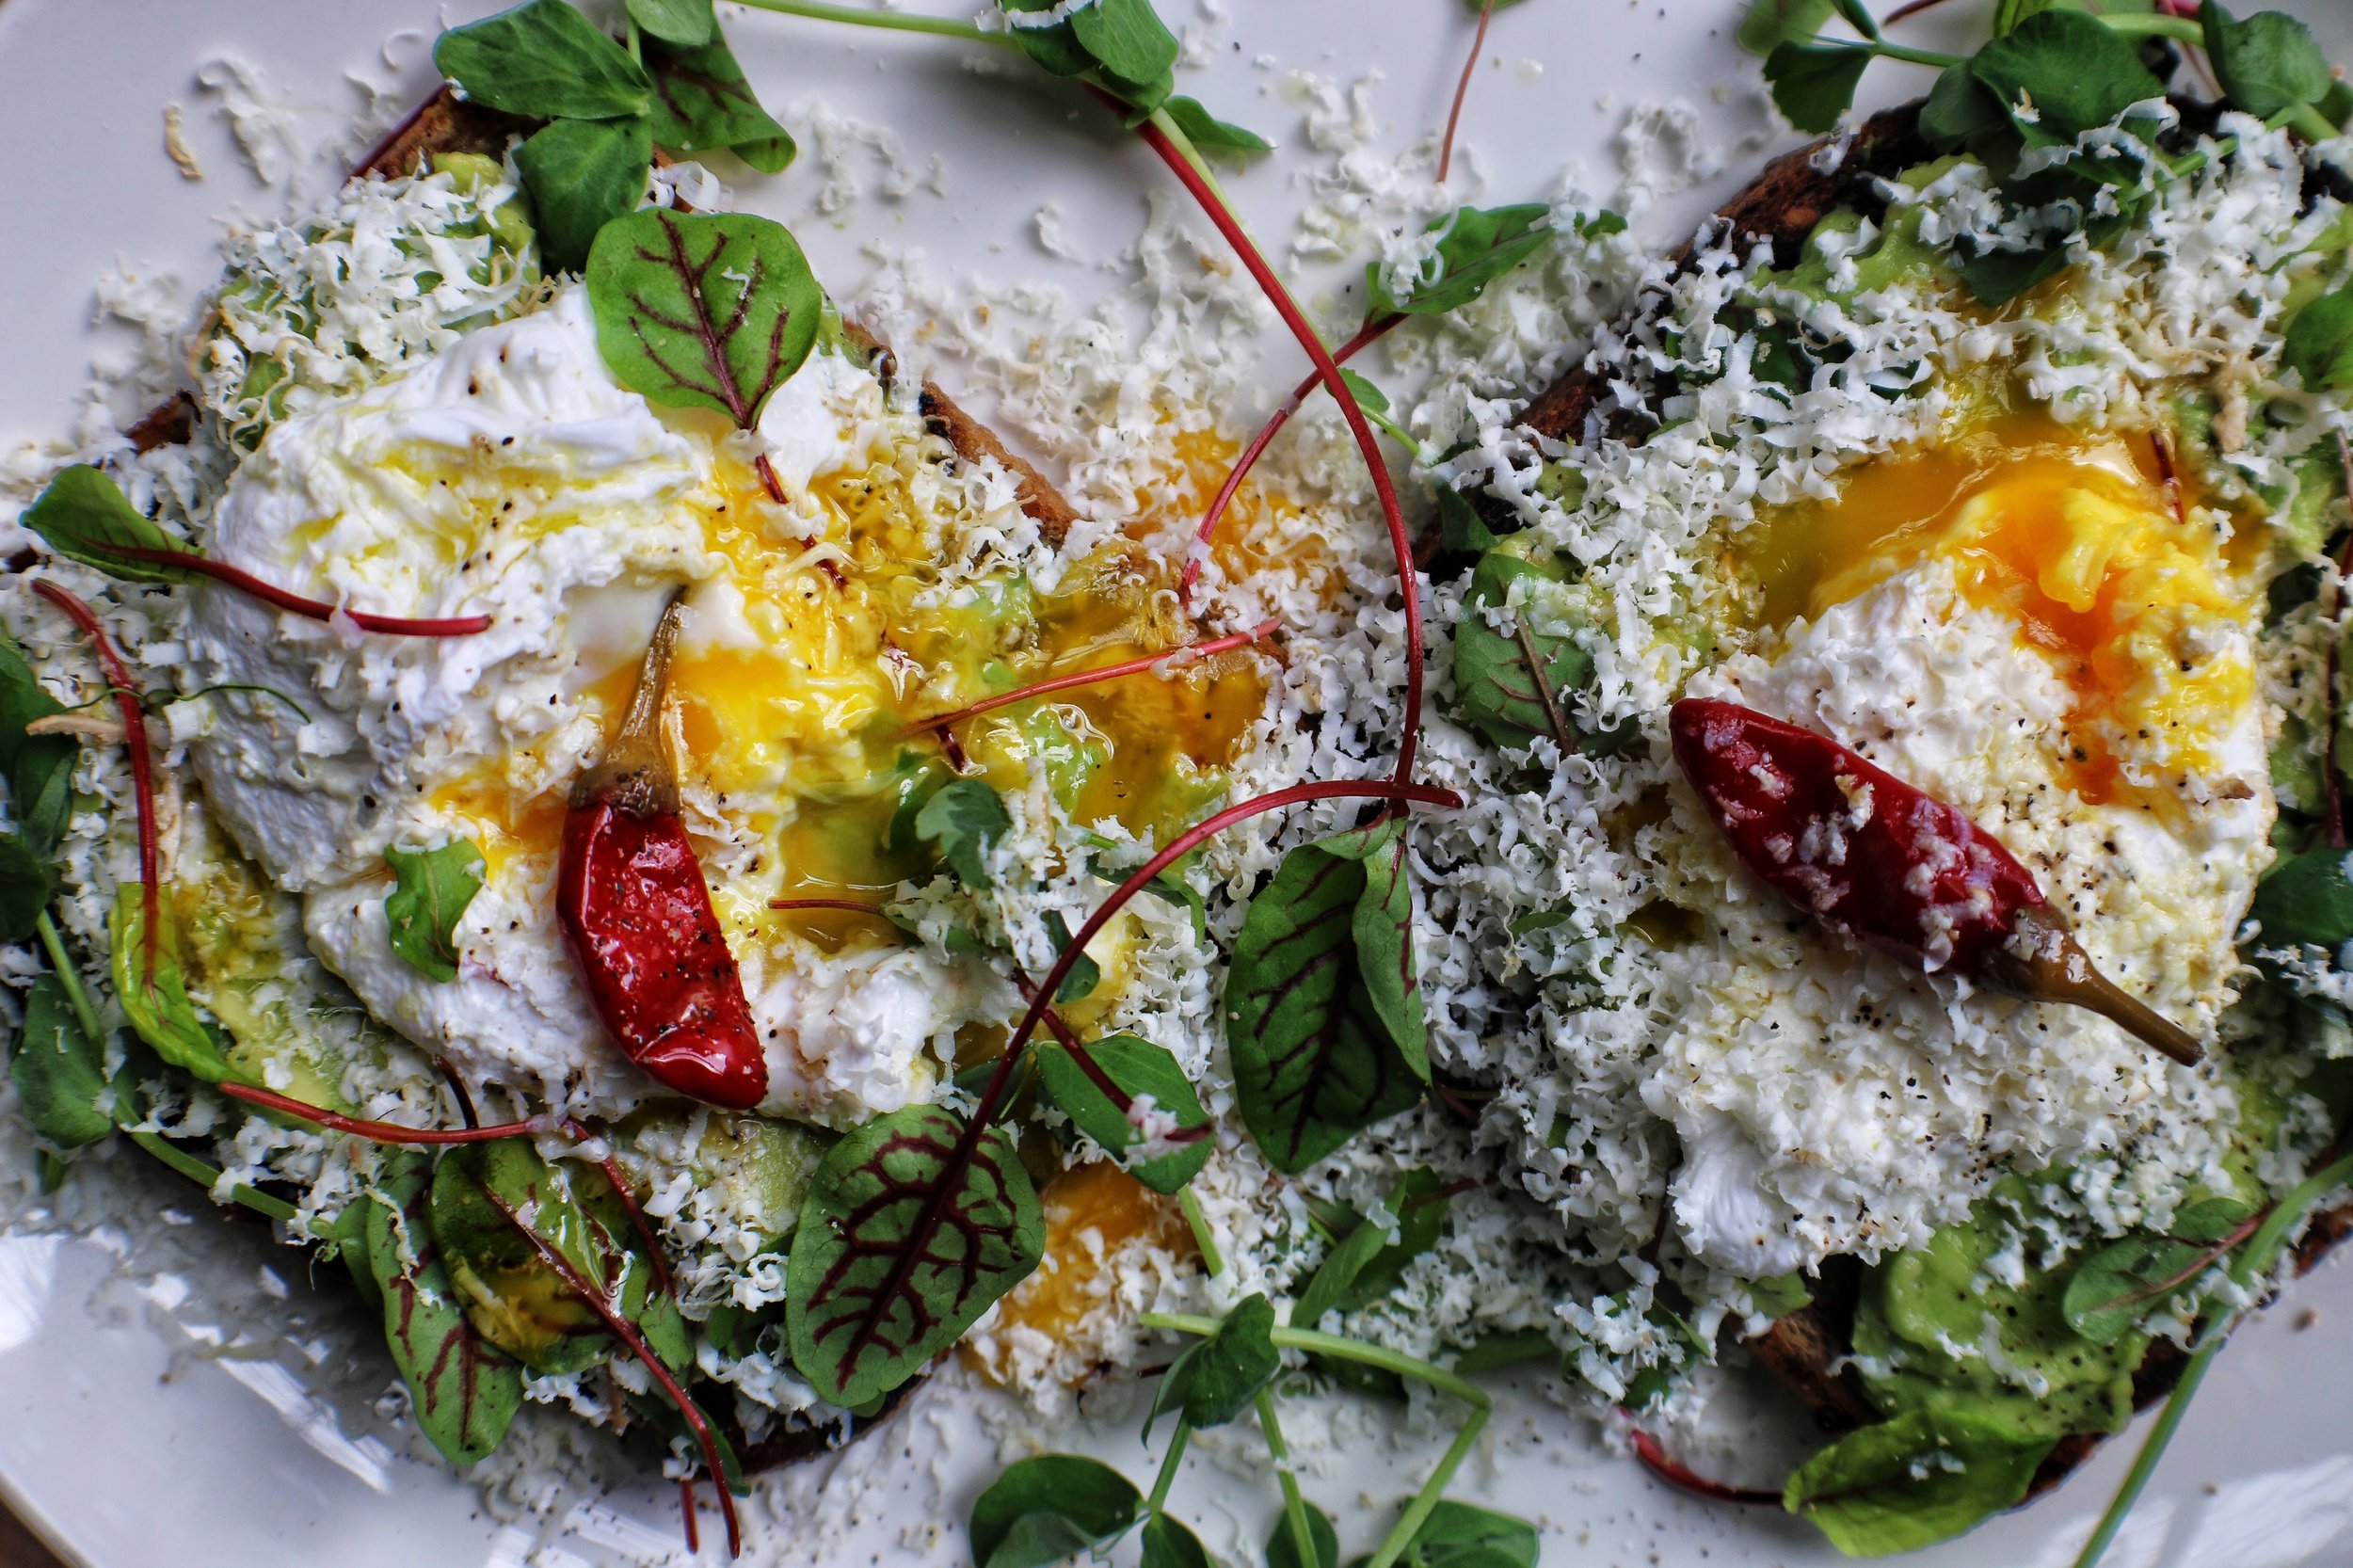  avocado toast with slow cooked eggs &amp; calabrian chiles 